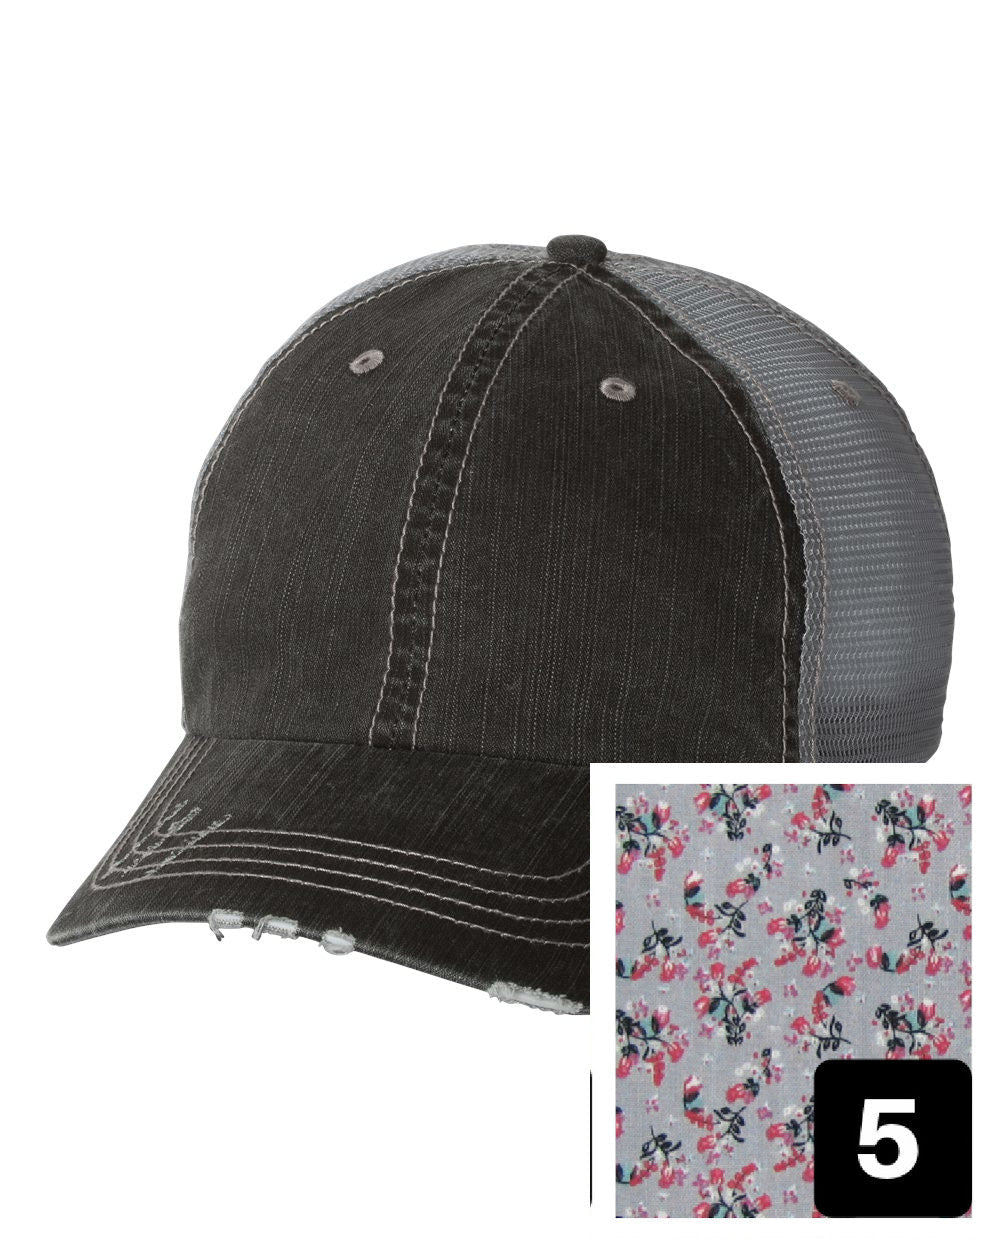 gray distressed trucker hat with purple and pink floral fabric state of Georgia